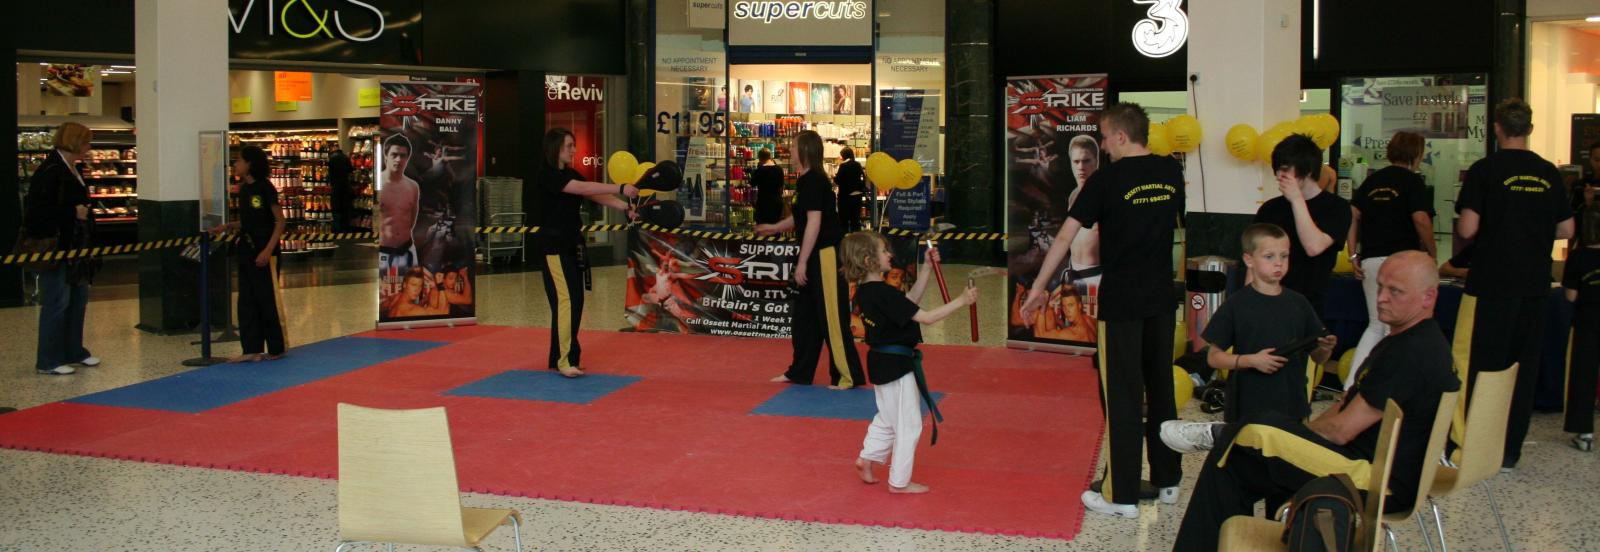 Ossett Martial Arts Exhibition with Strike Team Danny Ball a